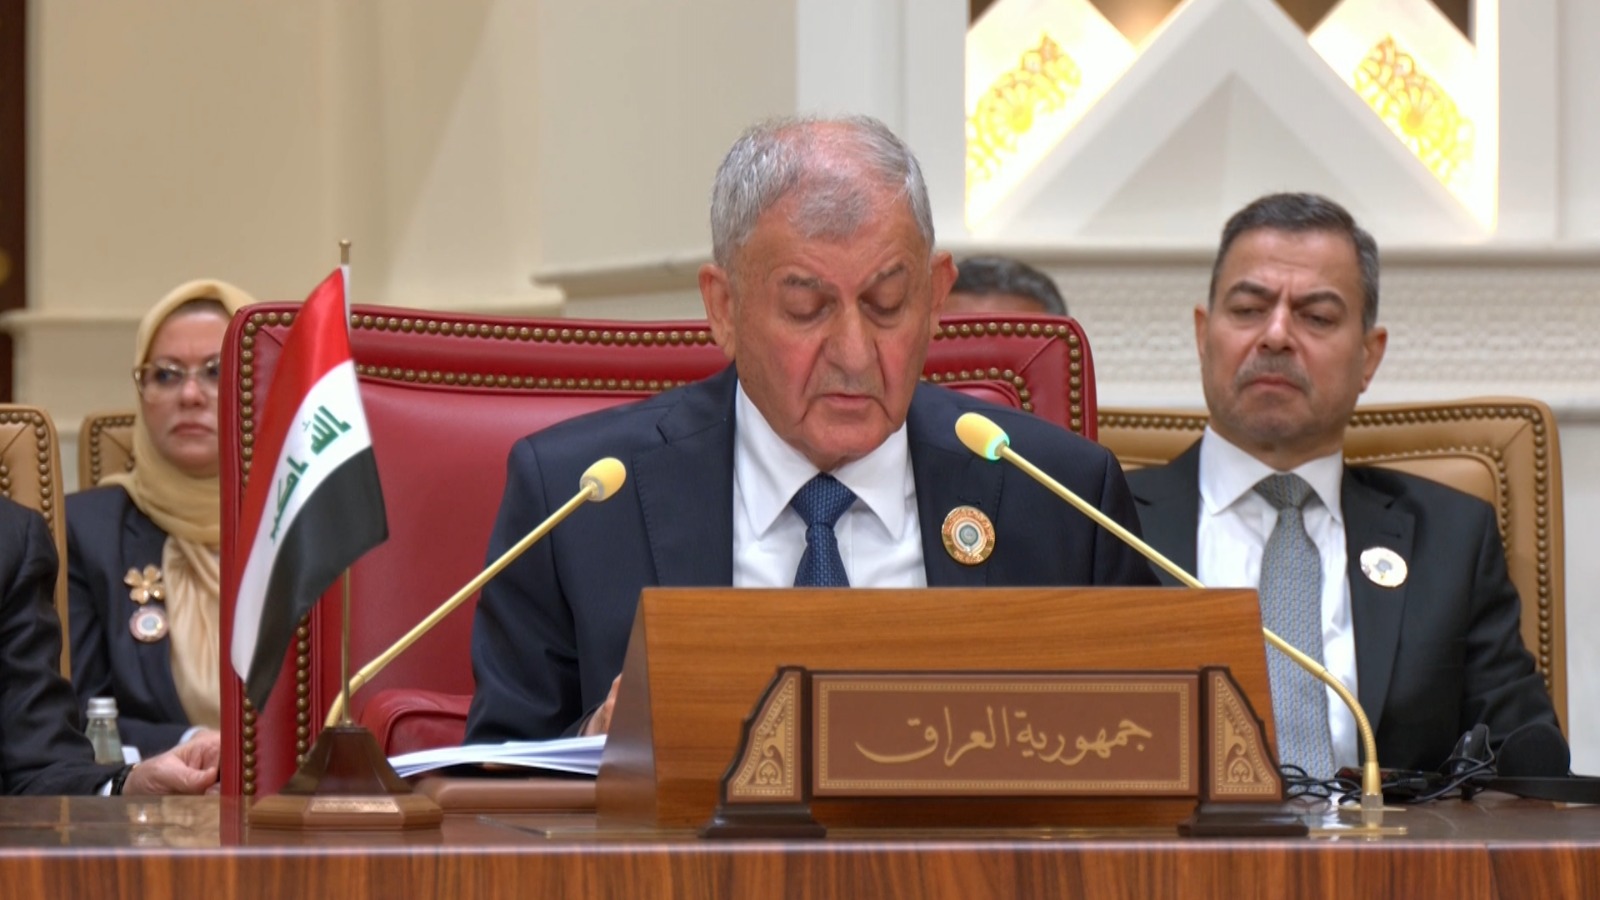 The President of the Republic - Iraq categorically rejects violations of its sovereignty under any pretext